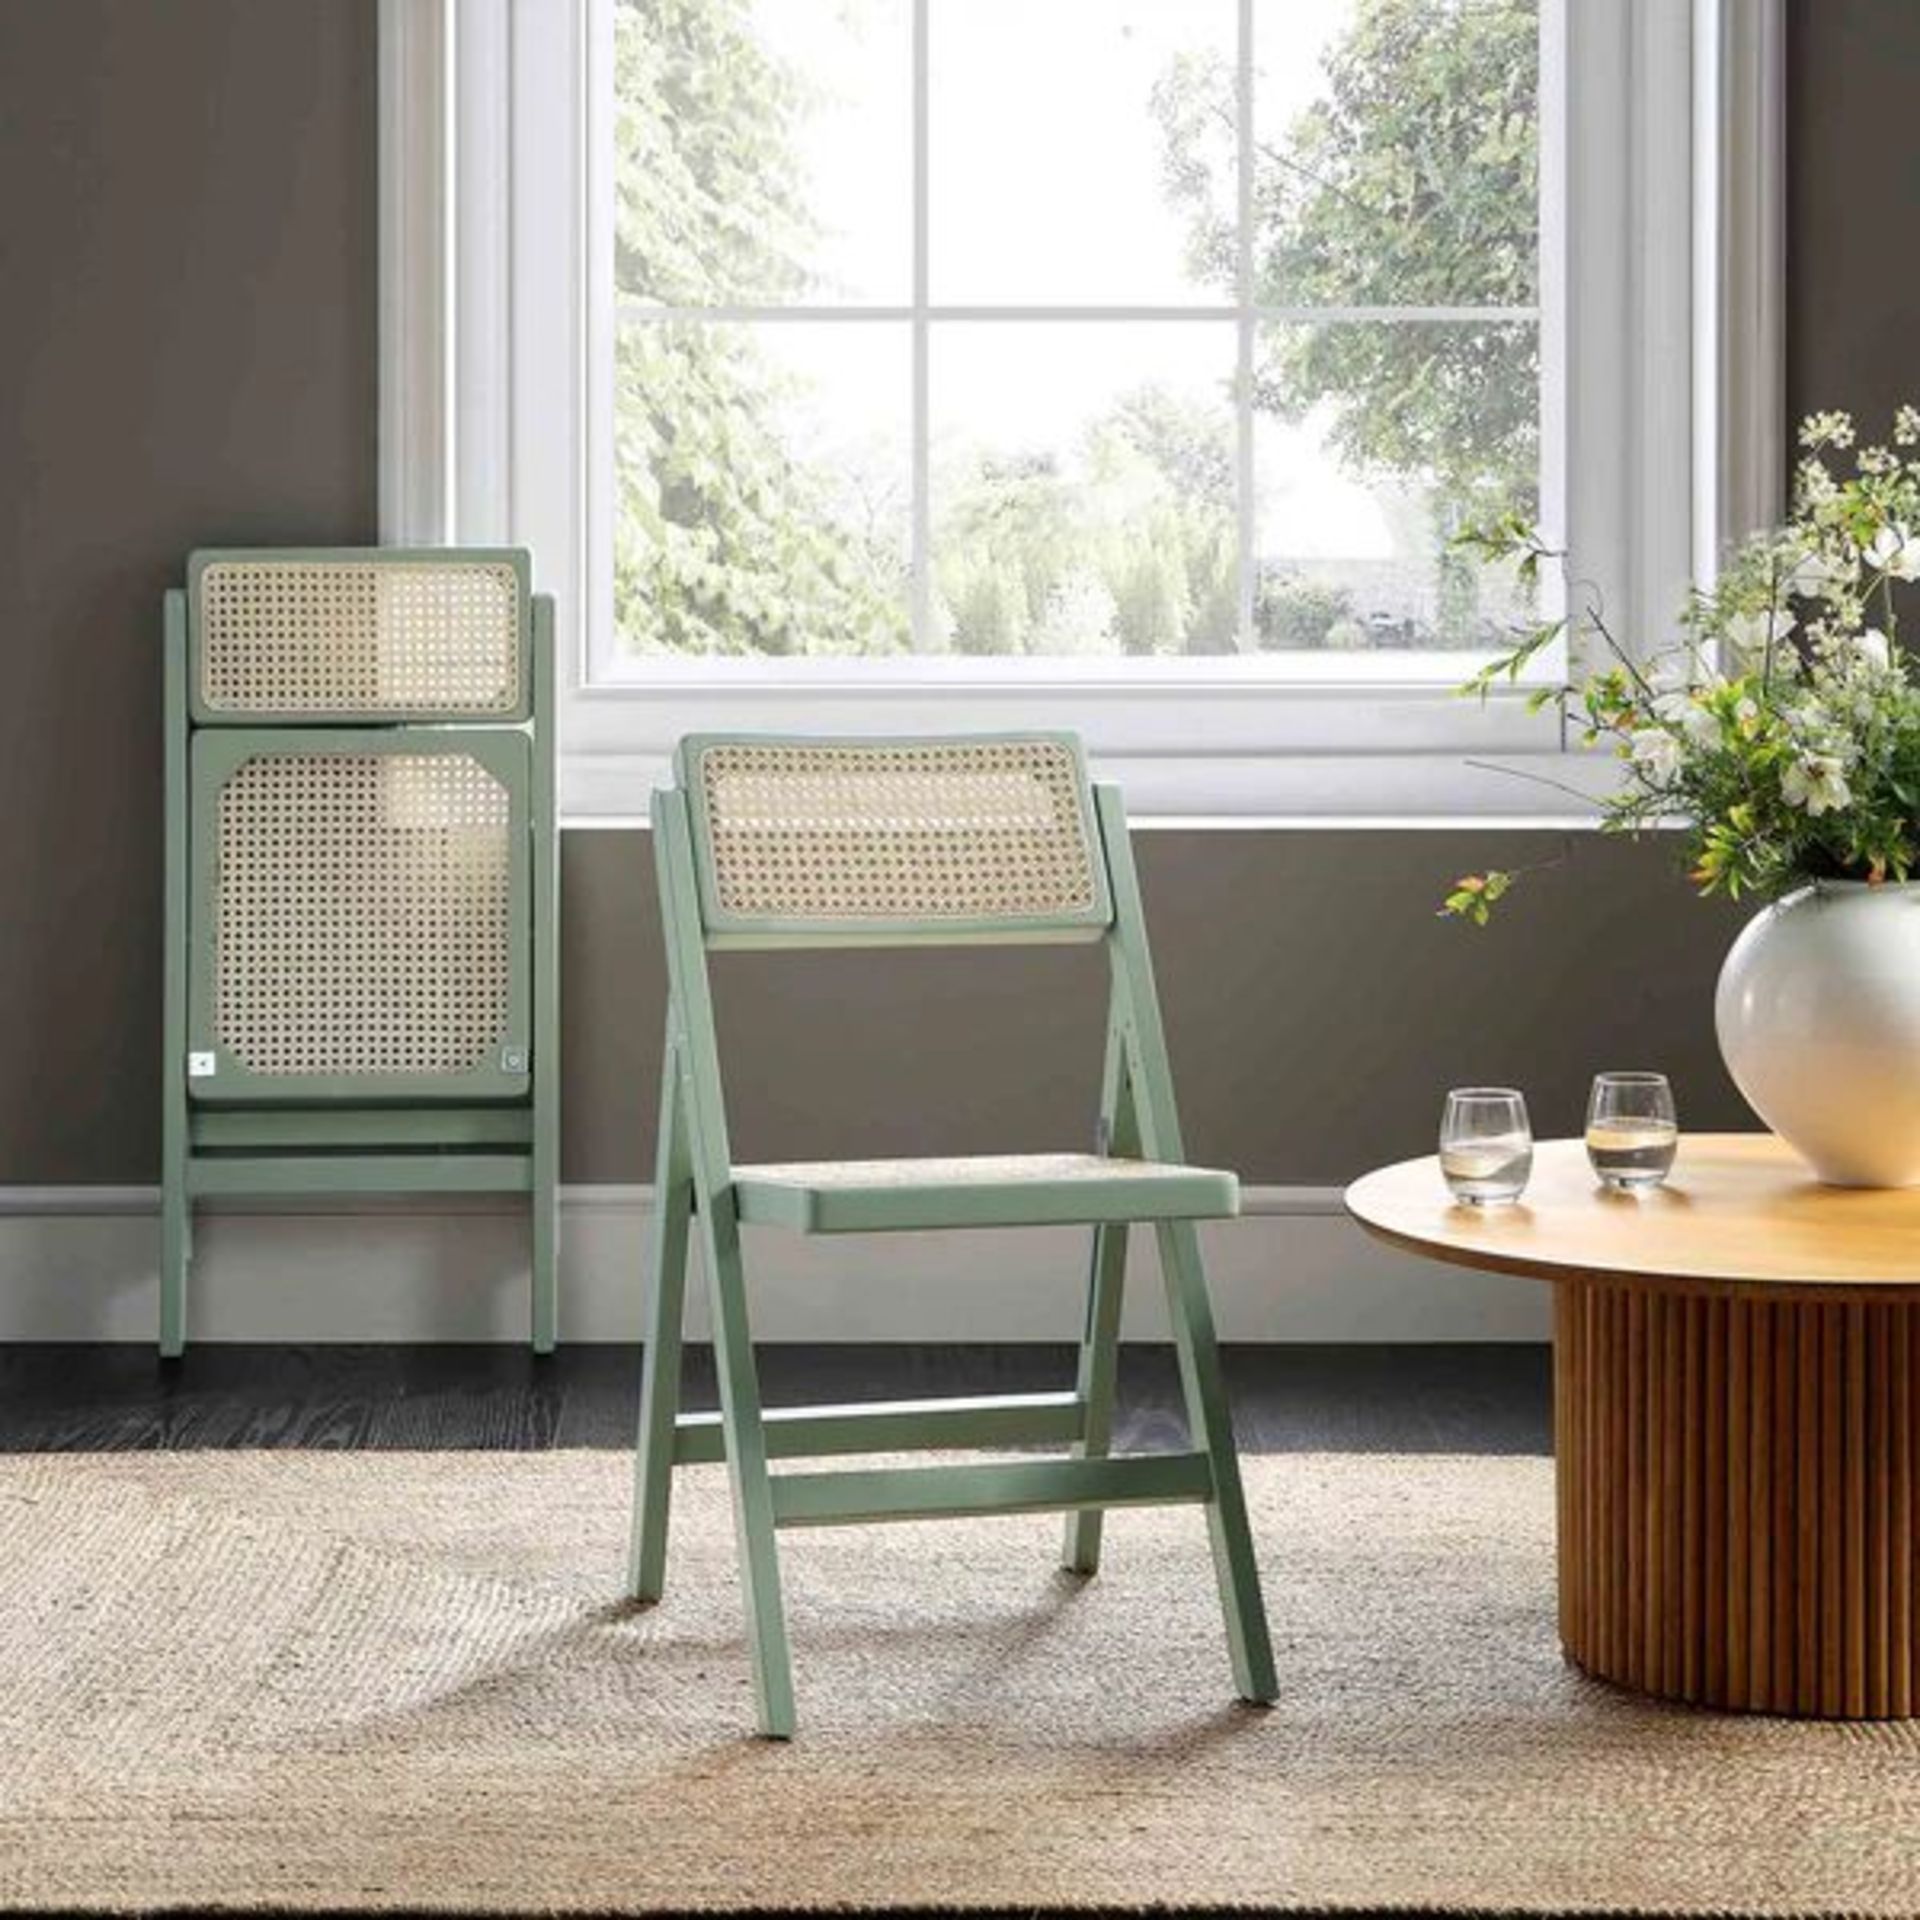 Frances Set of 2 Folding Cane Rattan Chairs, Mint. - ER31. RRP £249.99. With a solid beech wood